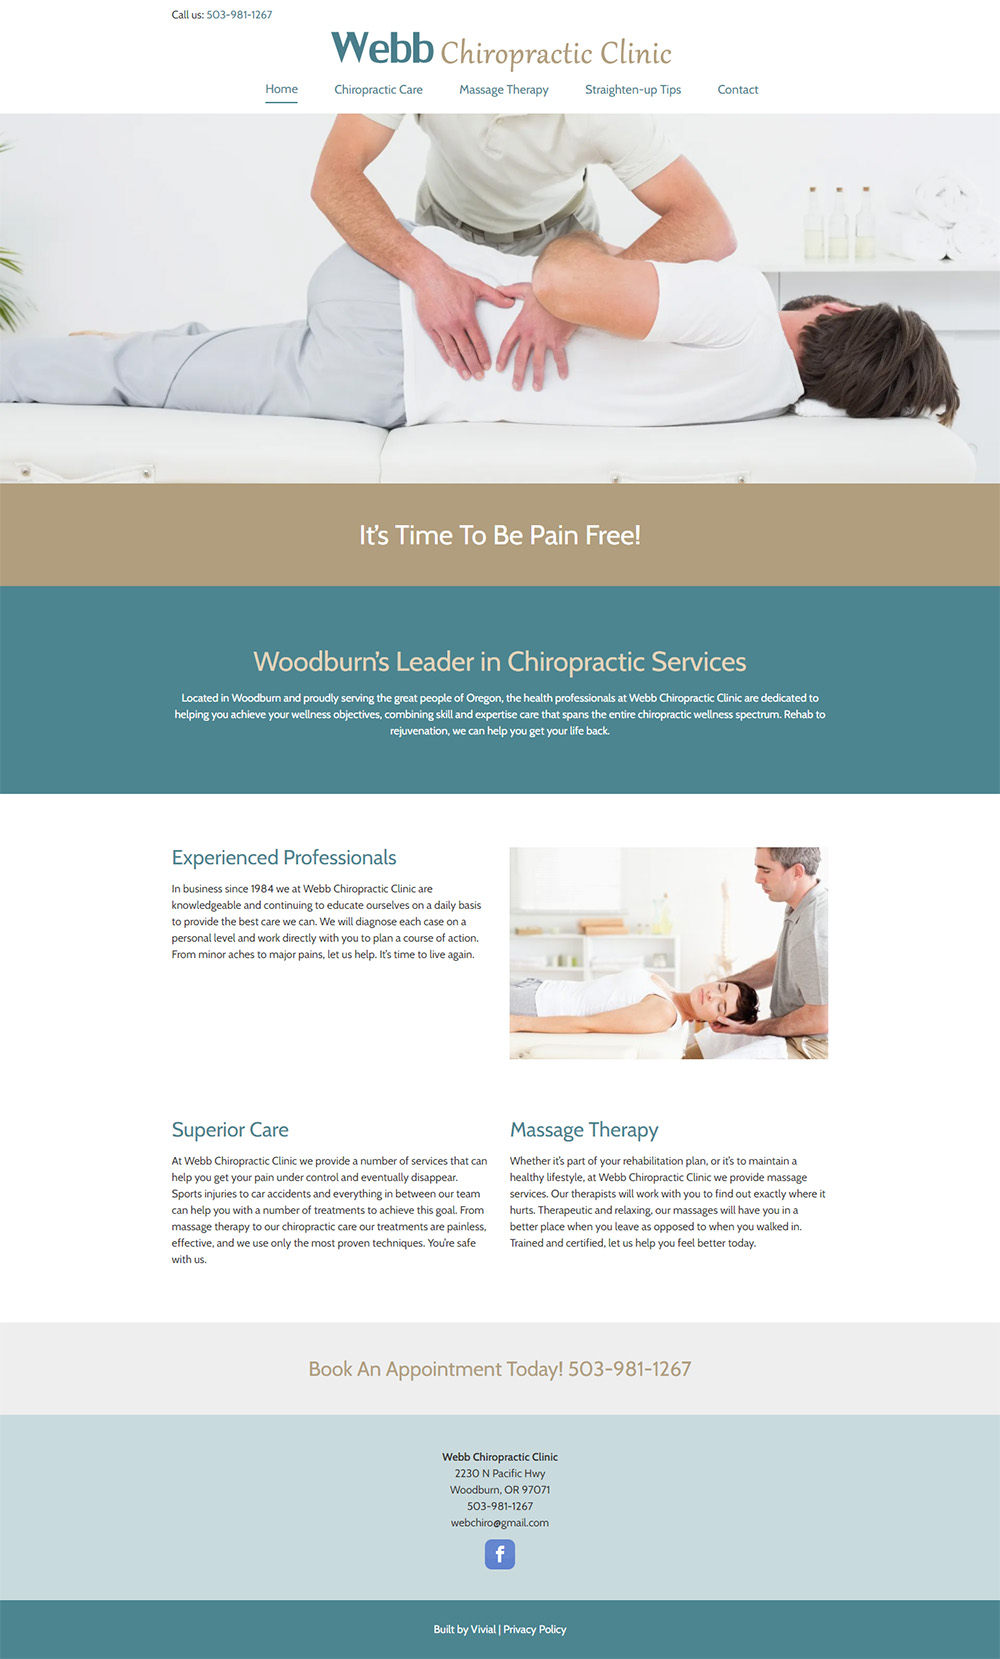 Webb Chiropractic Clinic Home page before redesign